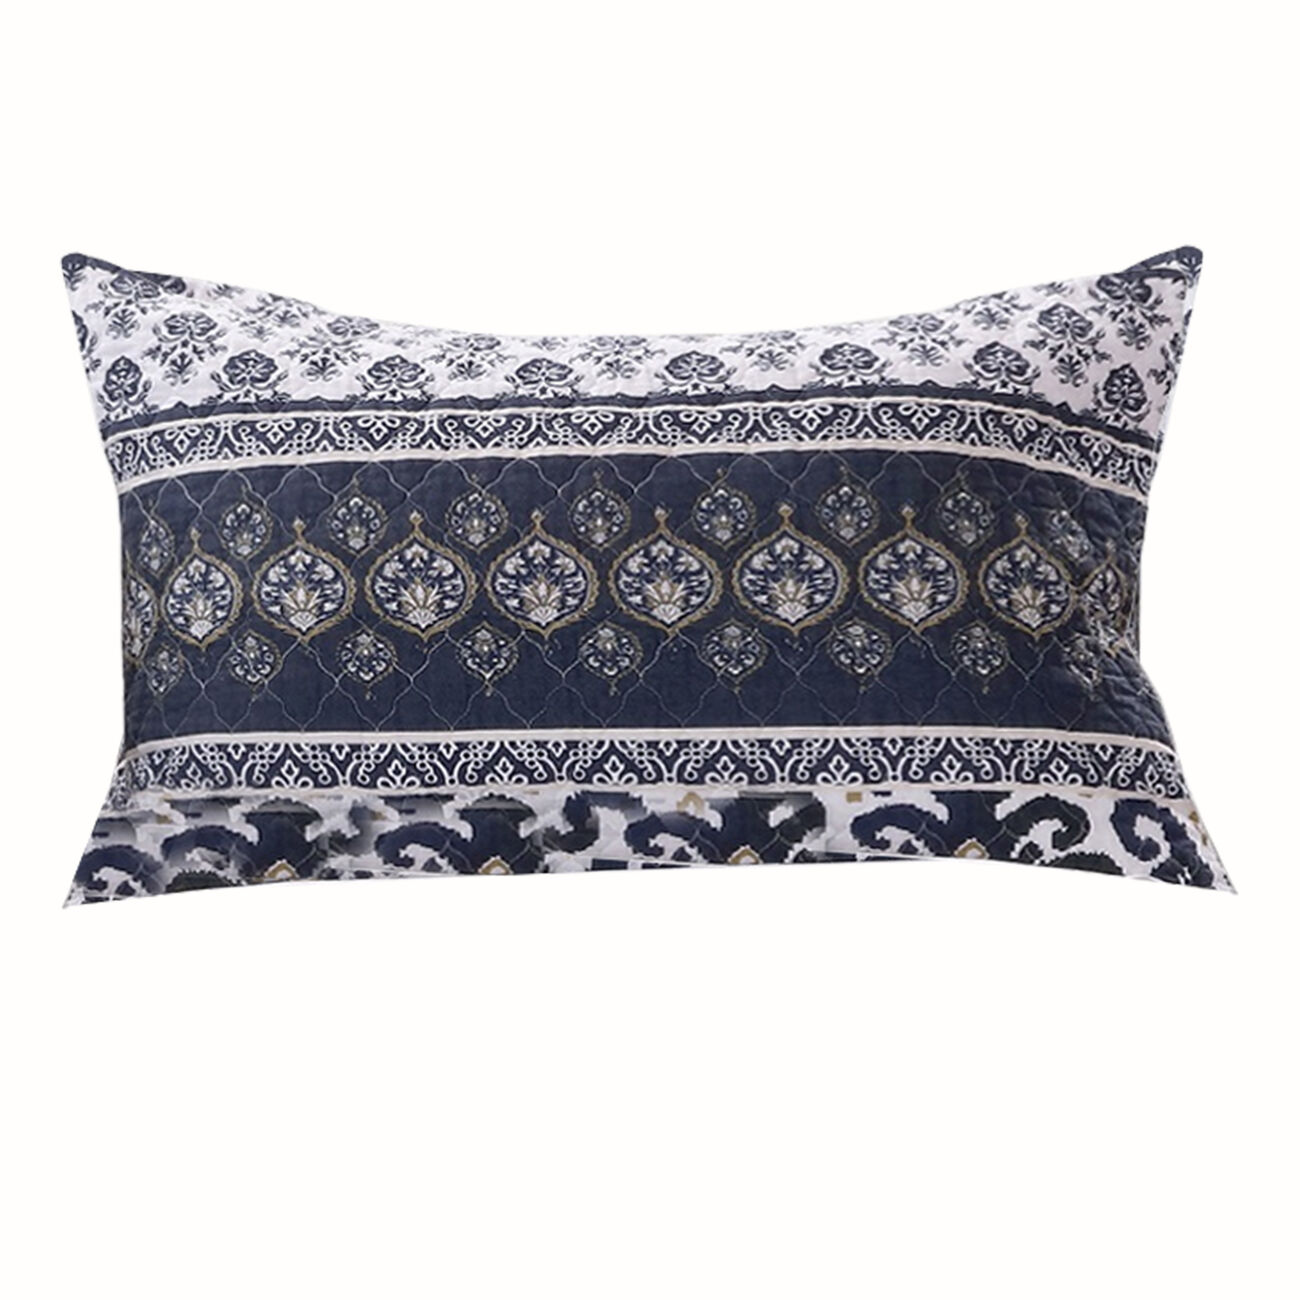 26 x 20 Fabric Pillow Sham with Ikat and Floral Motif, White and Blue - BM223393